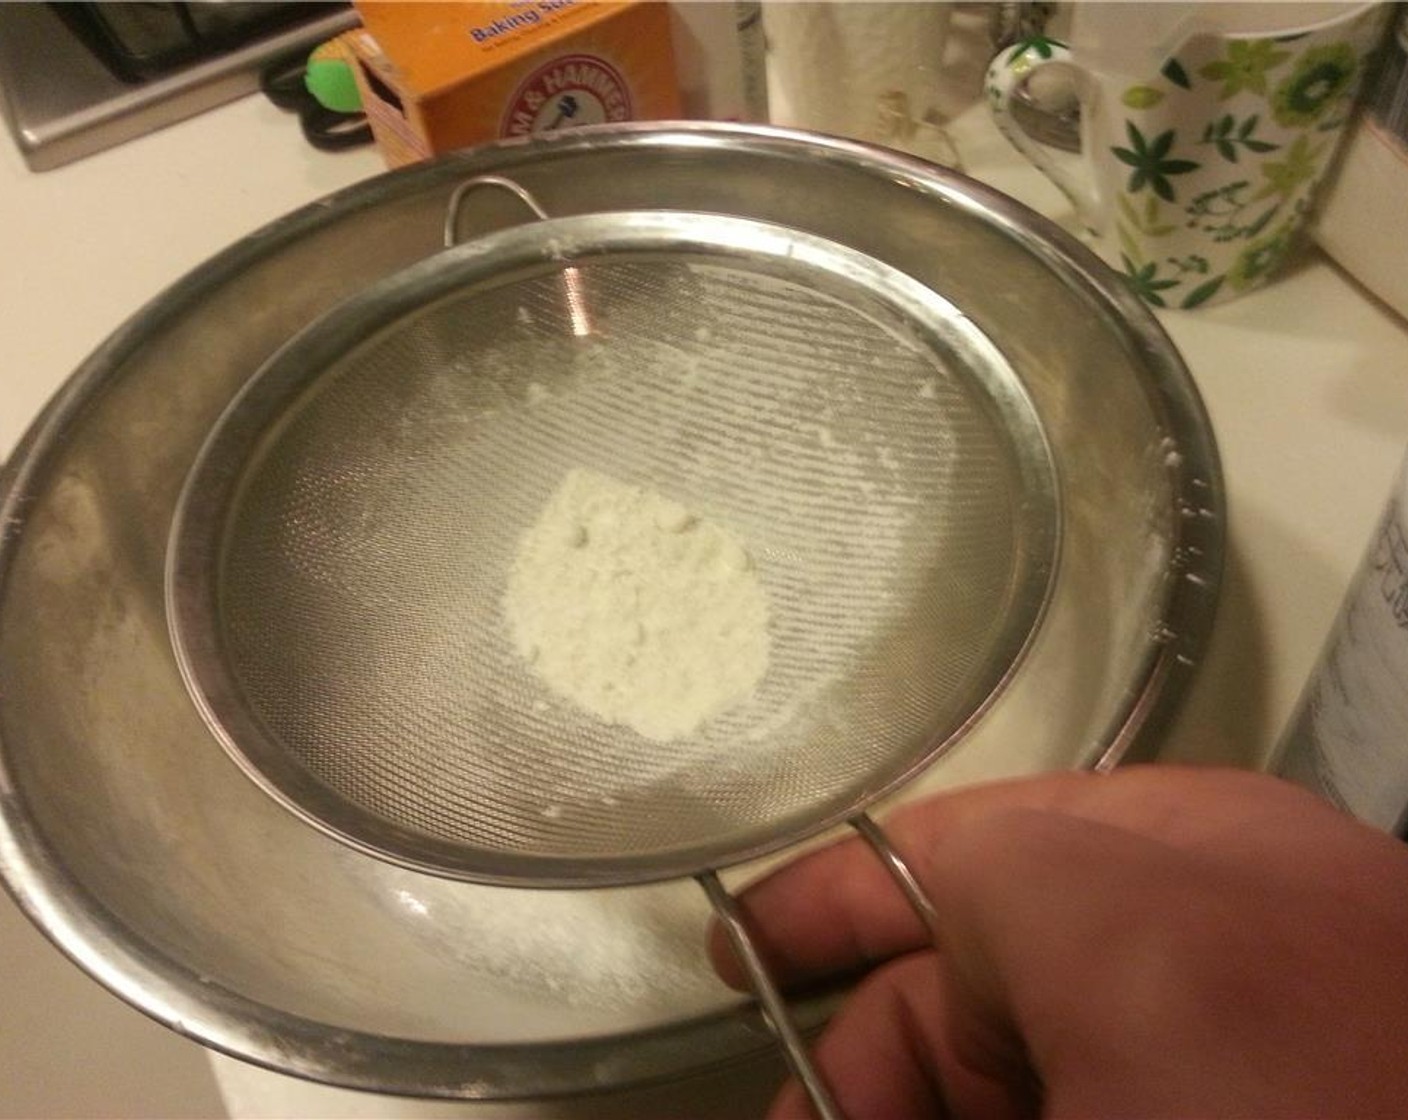 step 3 In a large bowl, sift and combine All-Purpose Flour (2 cups), Baking Powder (1 Tbsp), Baking Soda (1/4 tsp) and Salt (3/4 tsp).